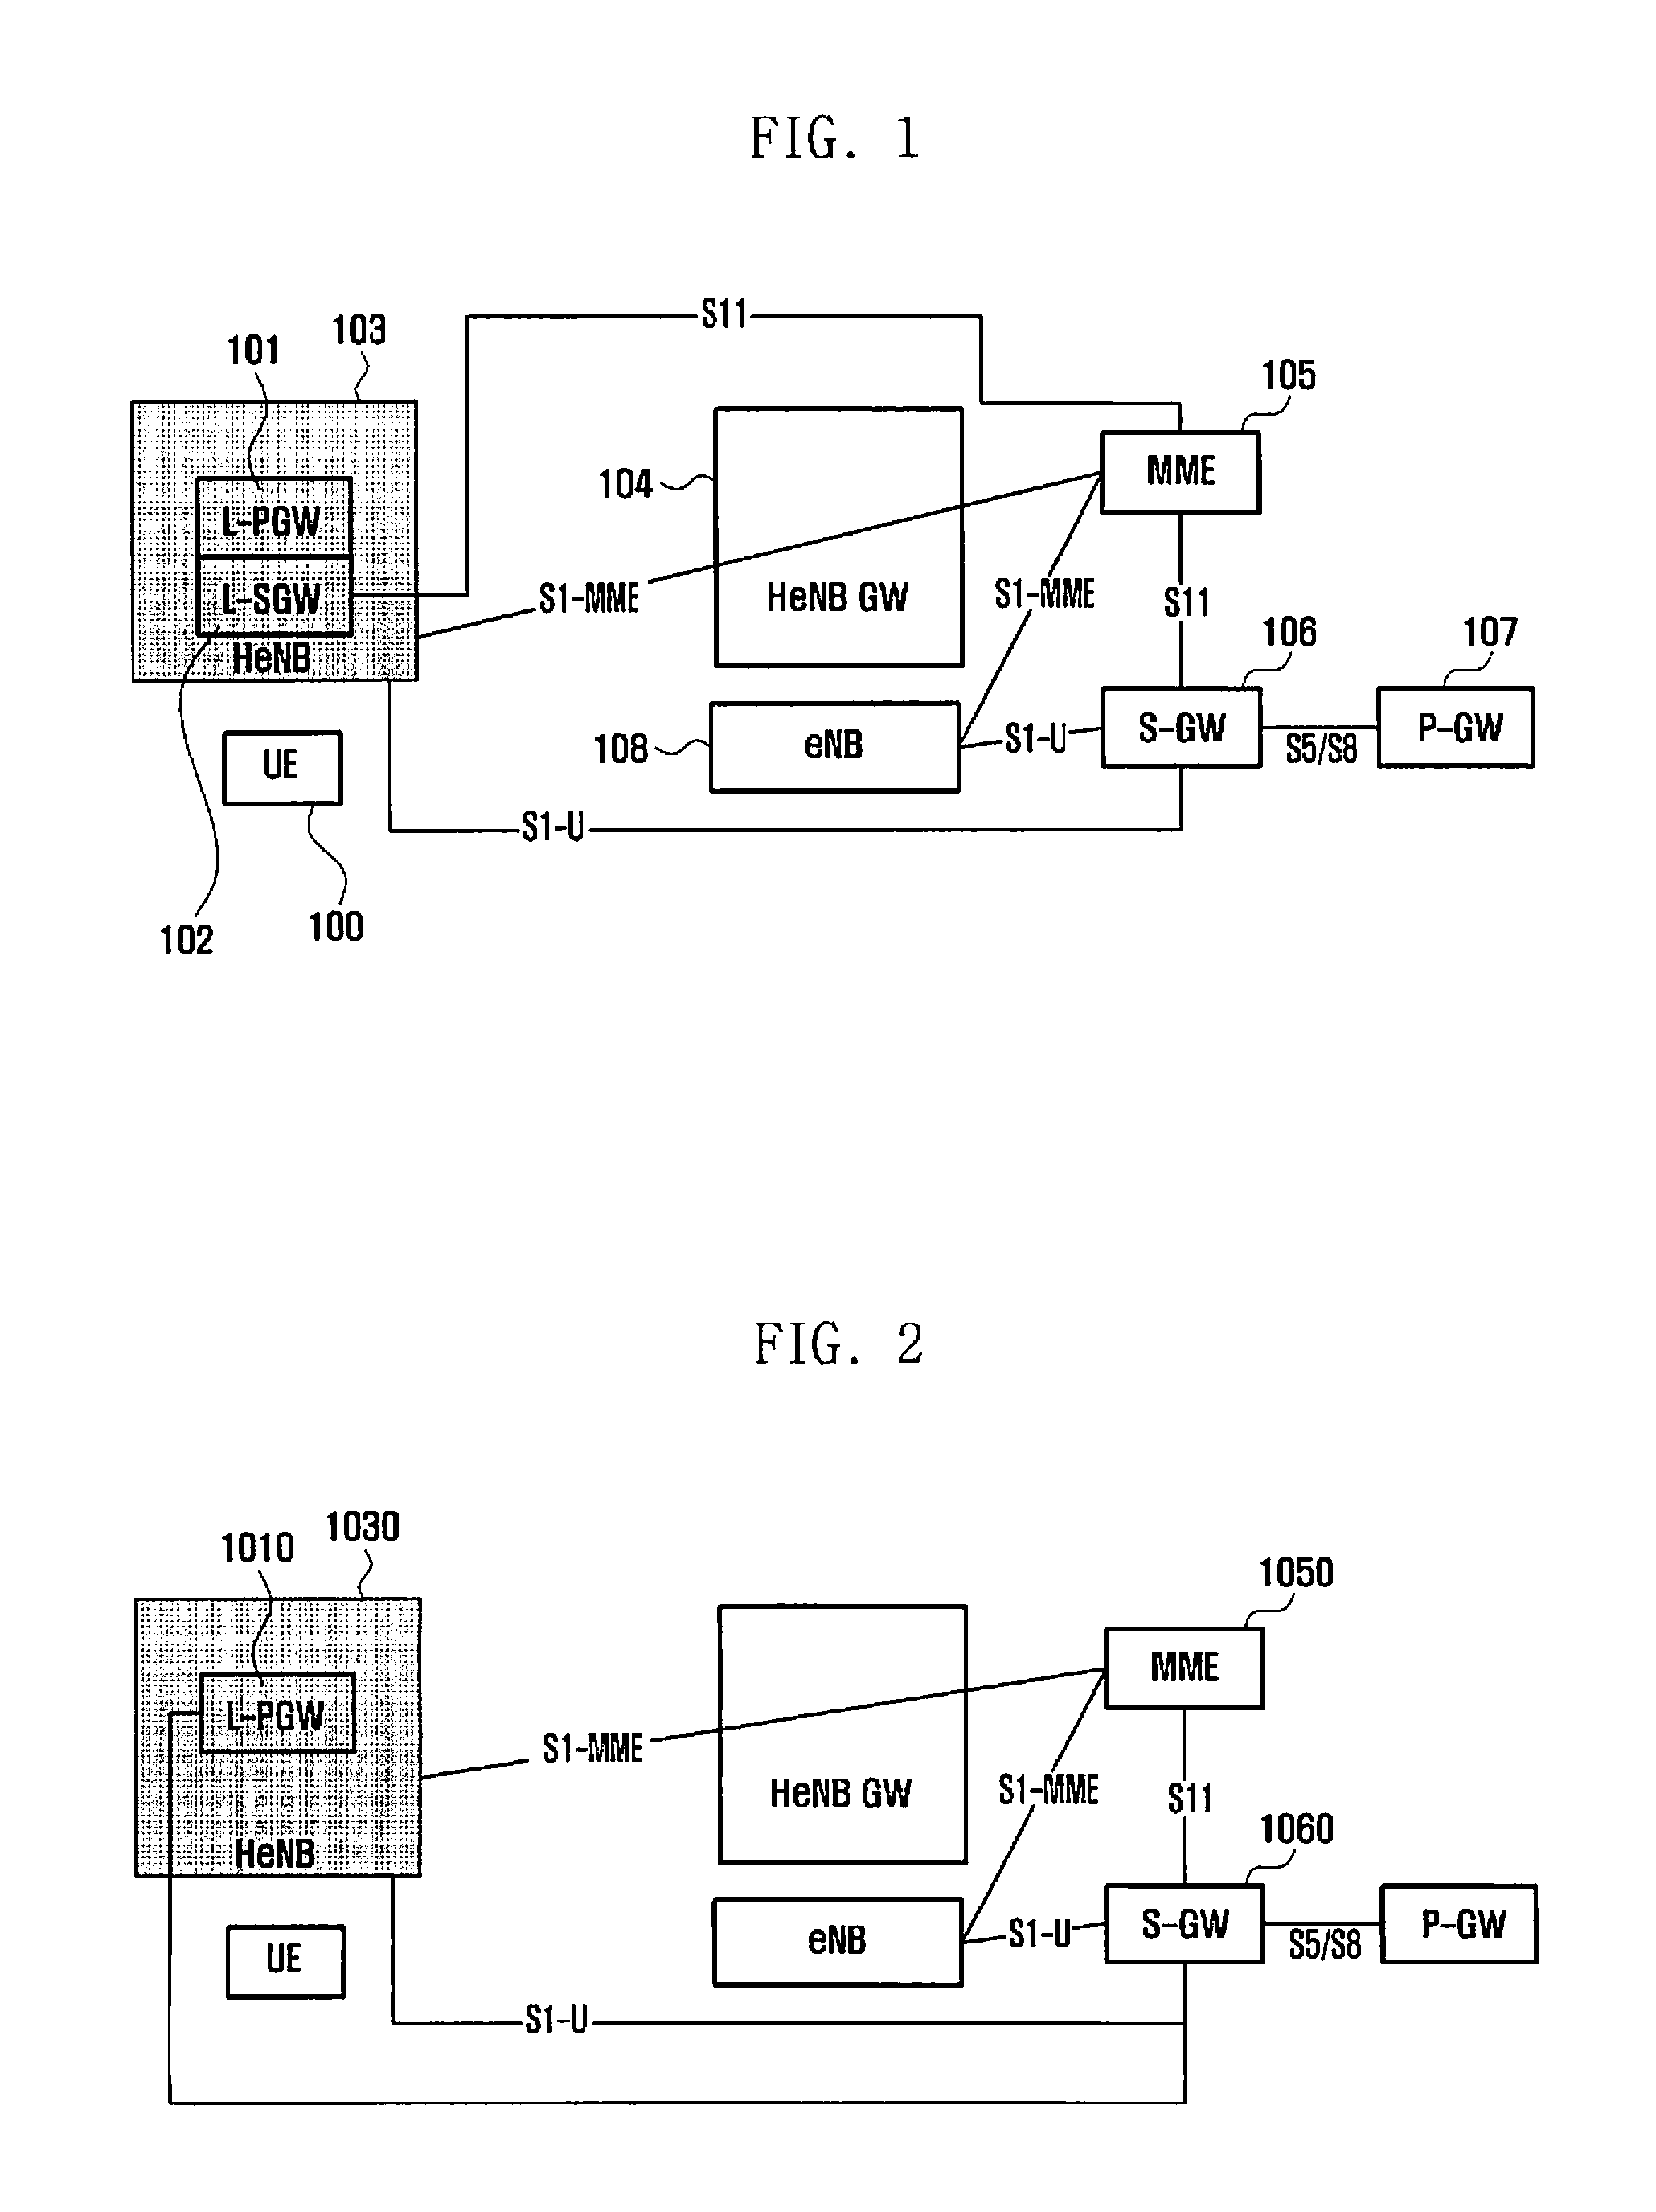 Method and apparatus for supporting local IP access in a femto cell of a wireless communication system